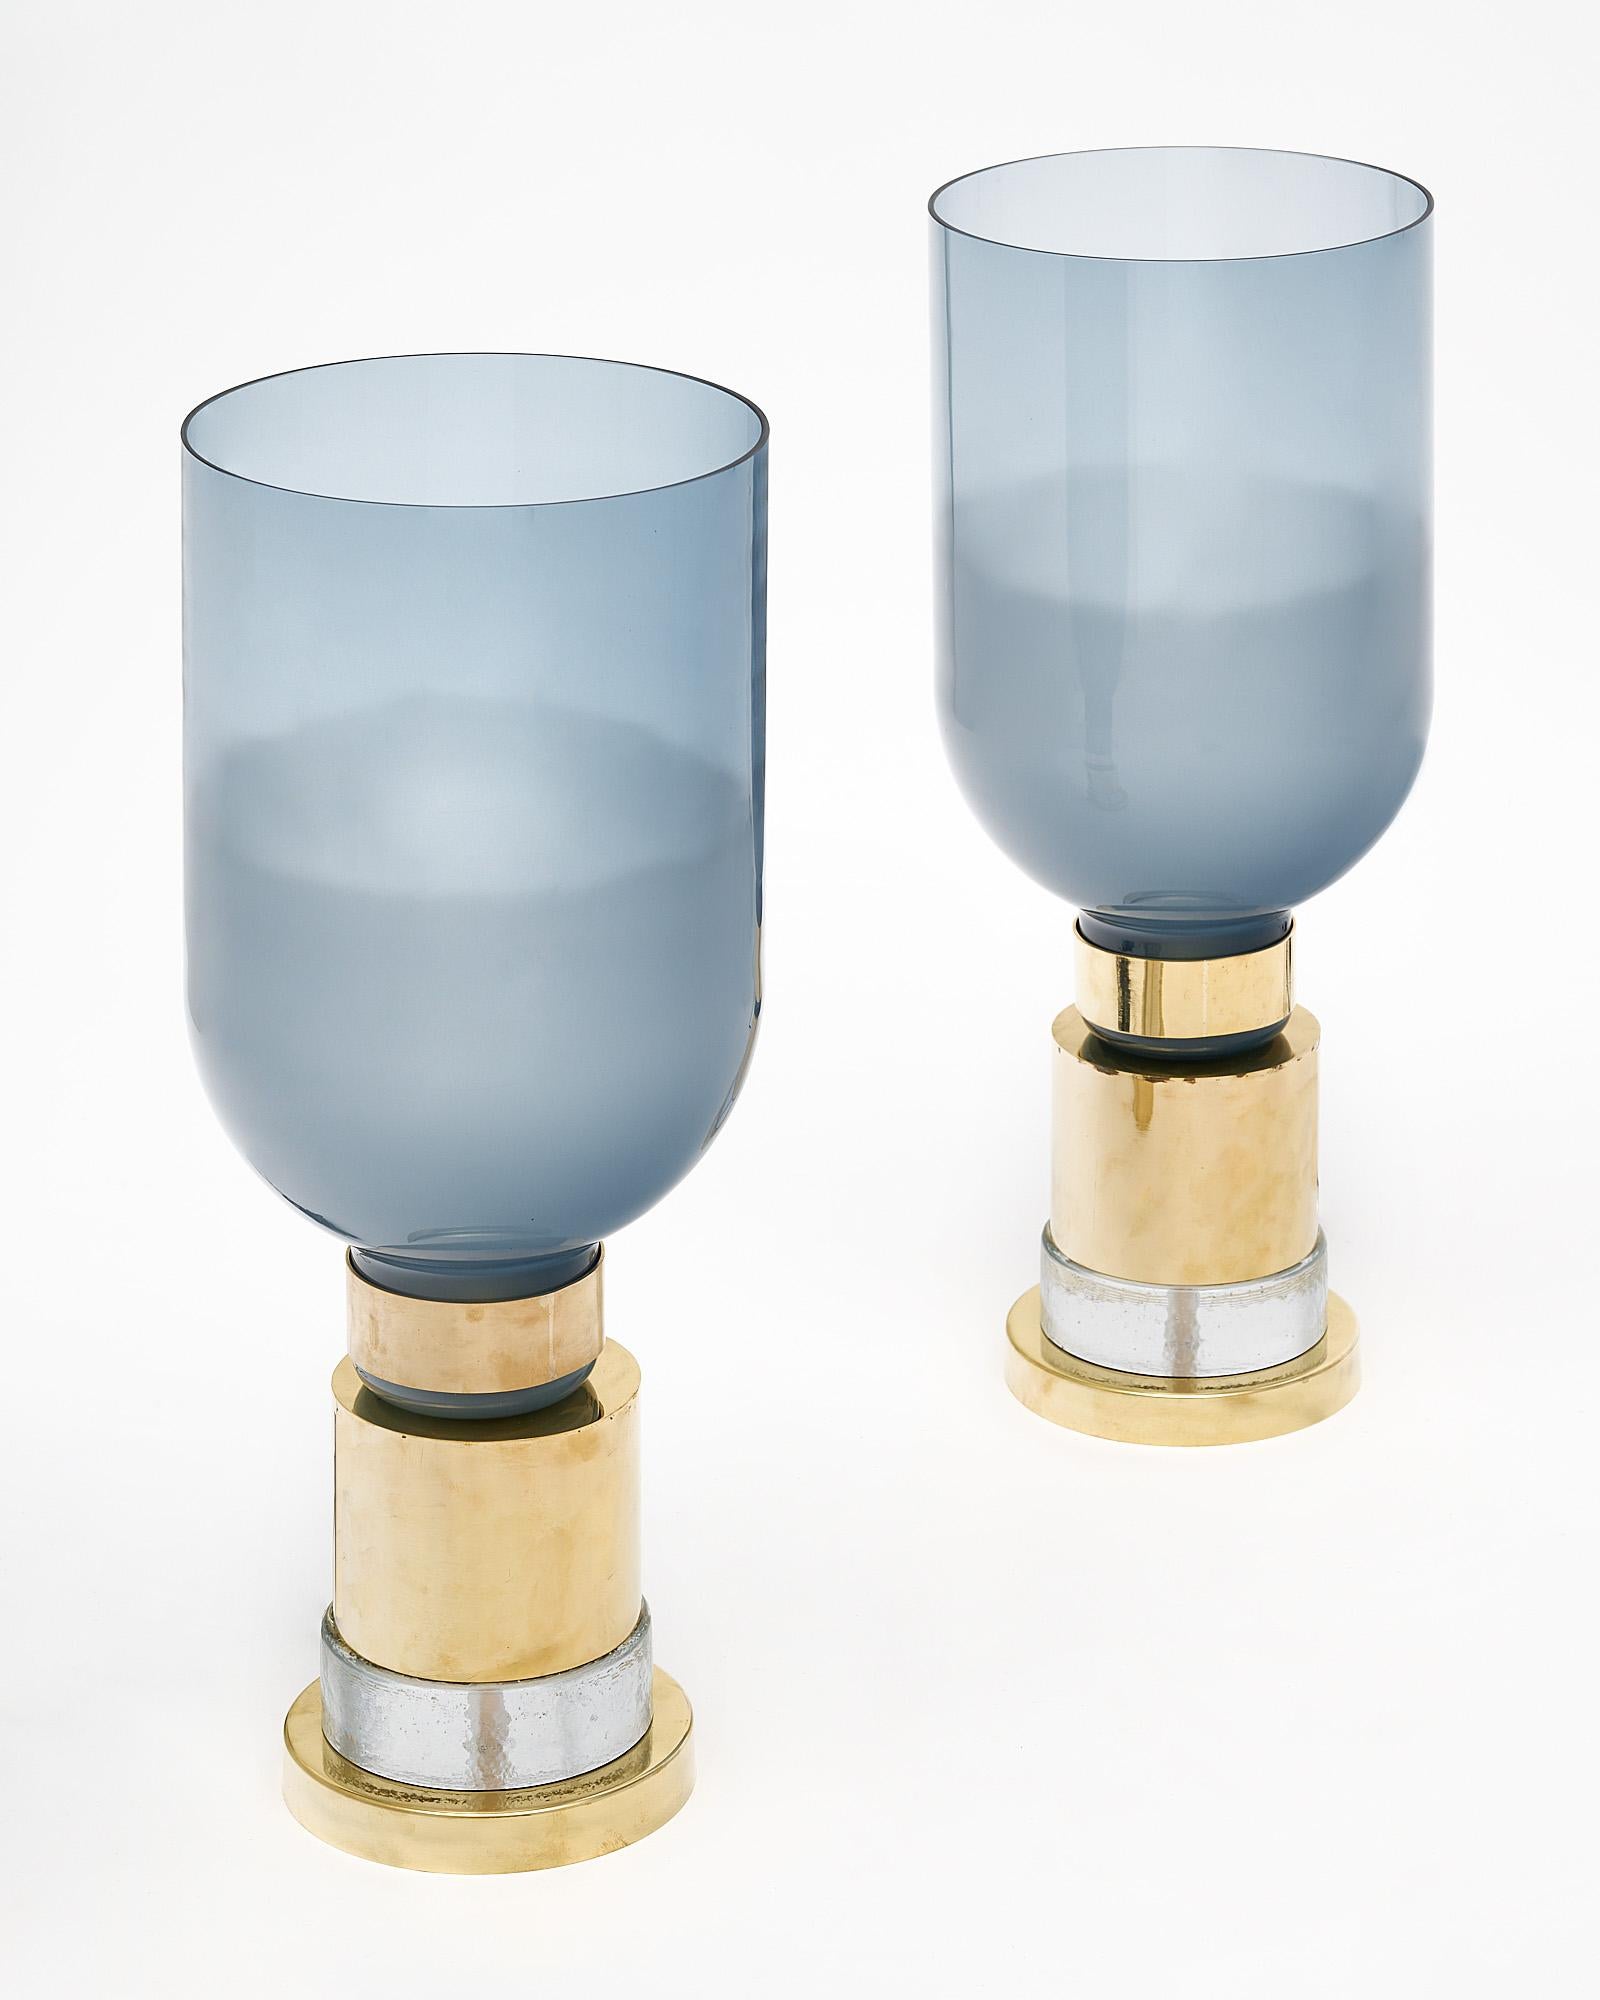 Pair of lamps from the island of Murano outside of Venice, Italy. This hand blown pair has a base made of brass and clear glass with a hand-blown blue and frosted glass shade. They have been newly wired to fit US standards.